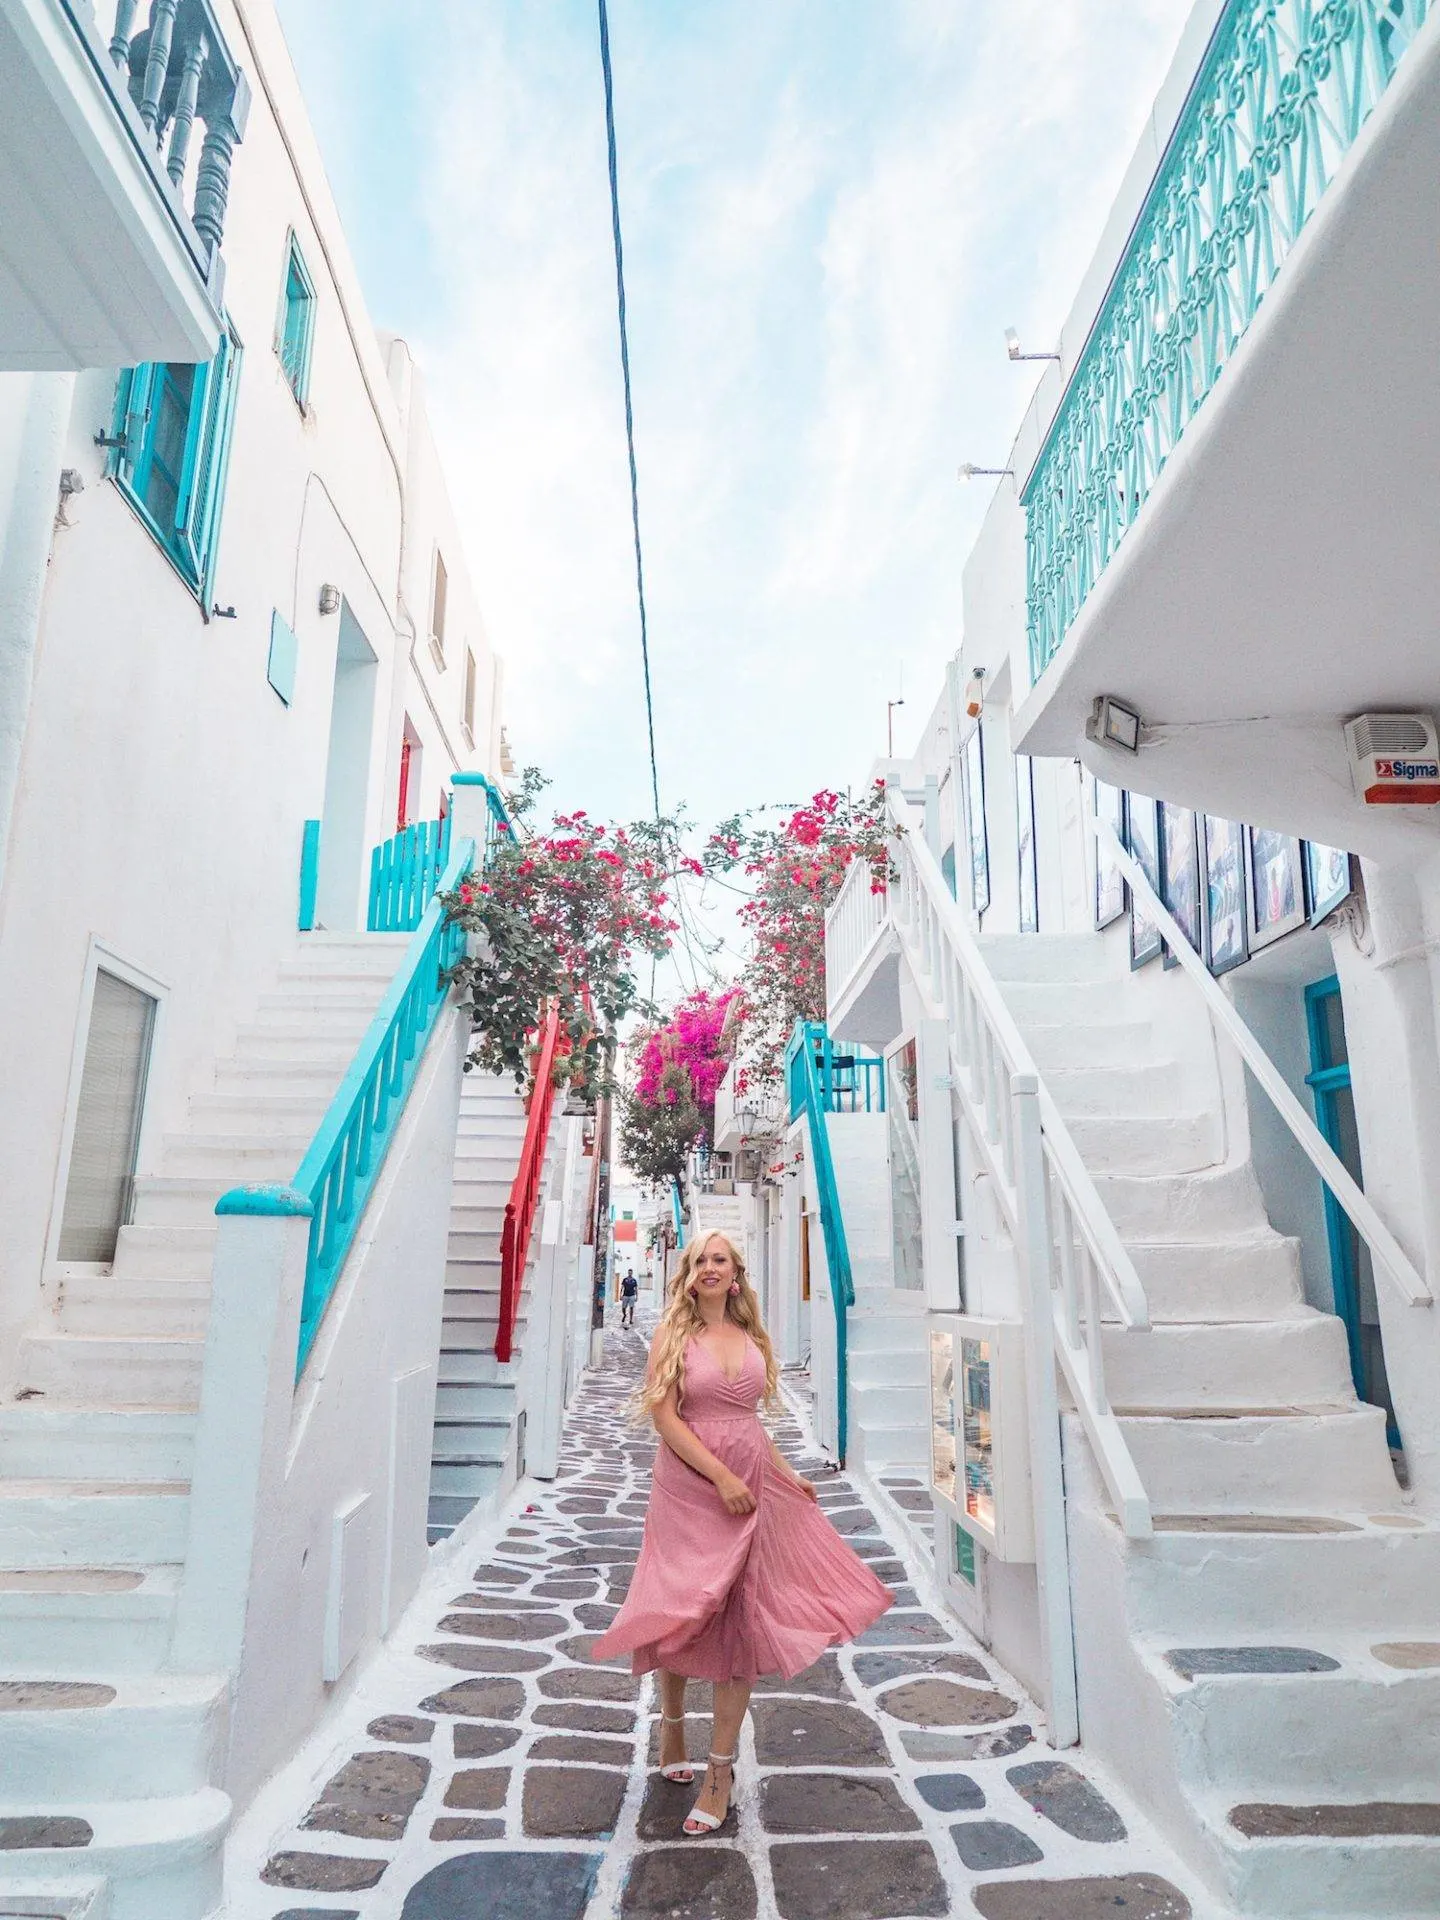 The most instagrammable places in Mykonos - the tiny cobble streets of Old Town Mykonos. Click the photo to see the rest of my list of the most instagrammable places in Mykonos! 